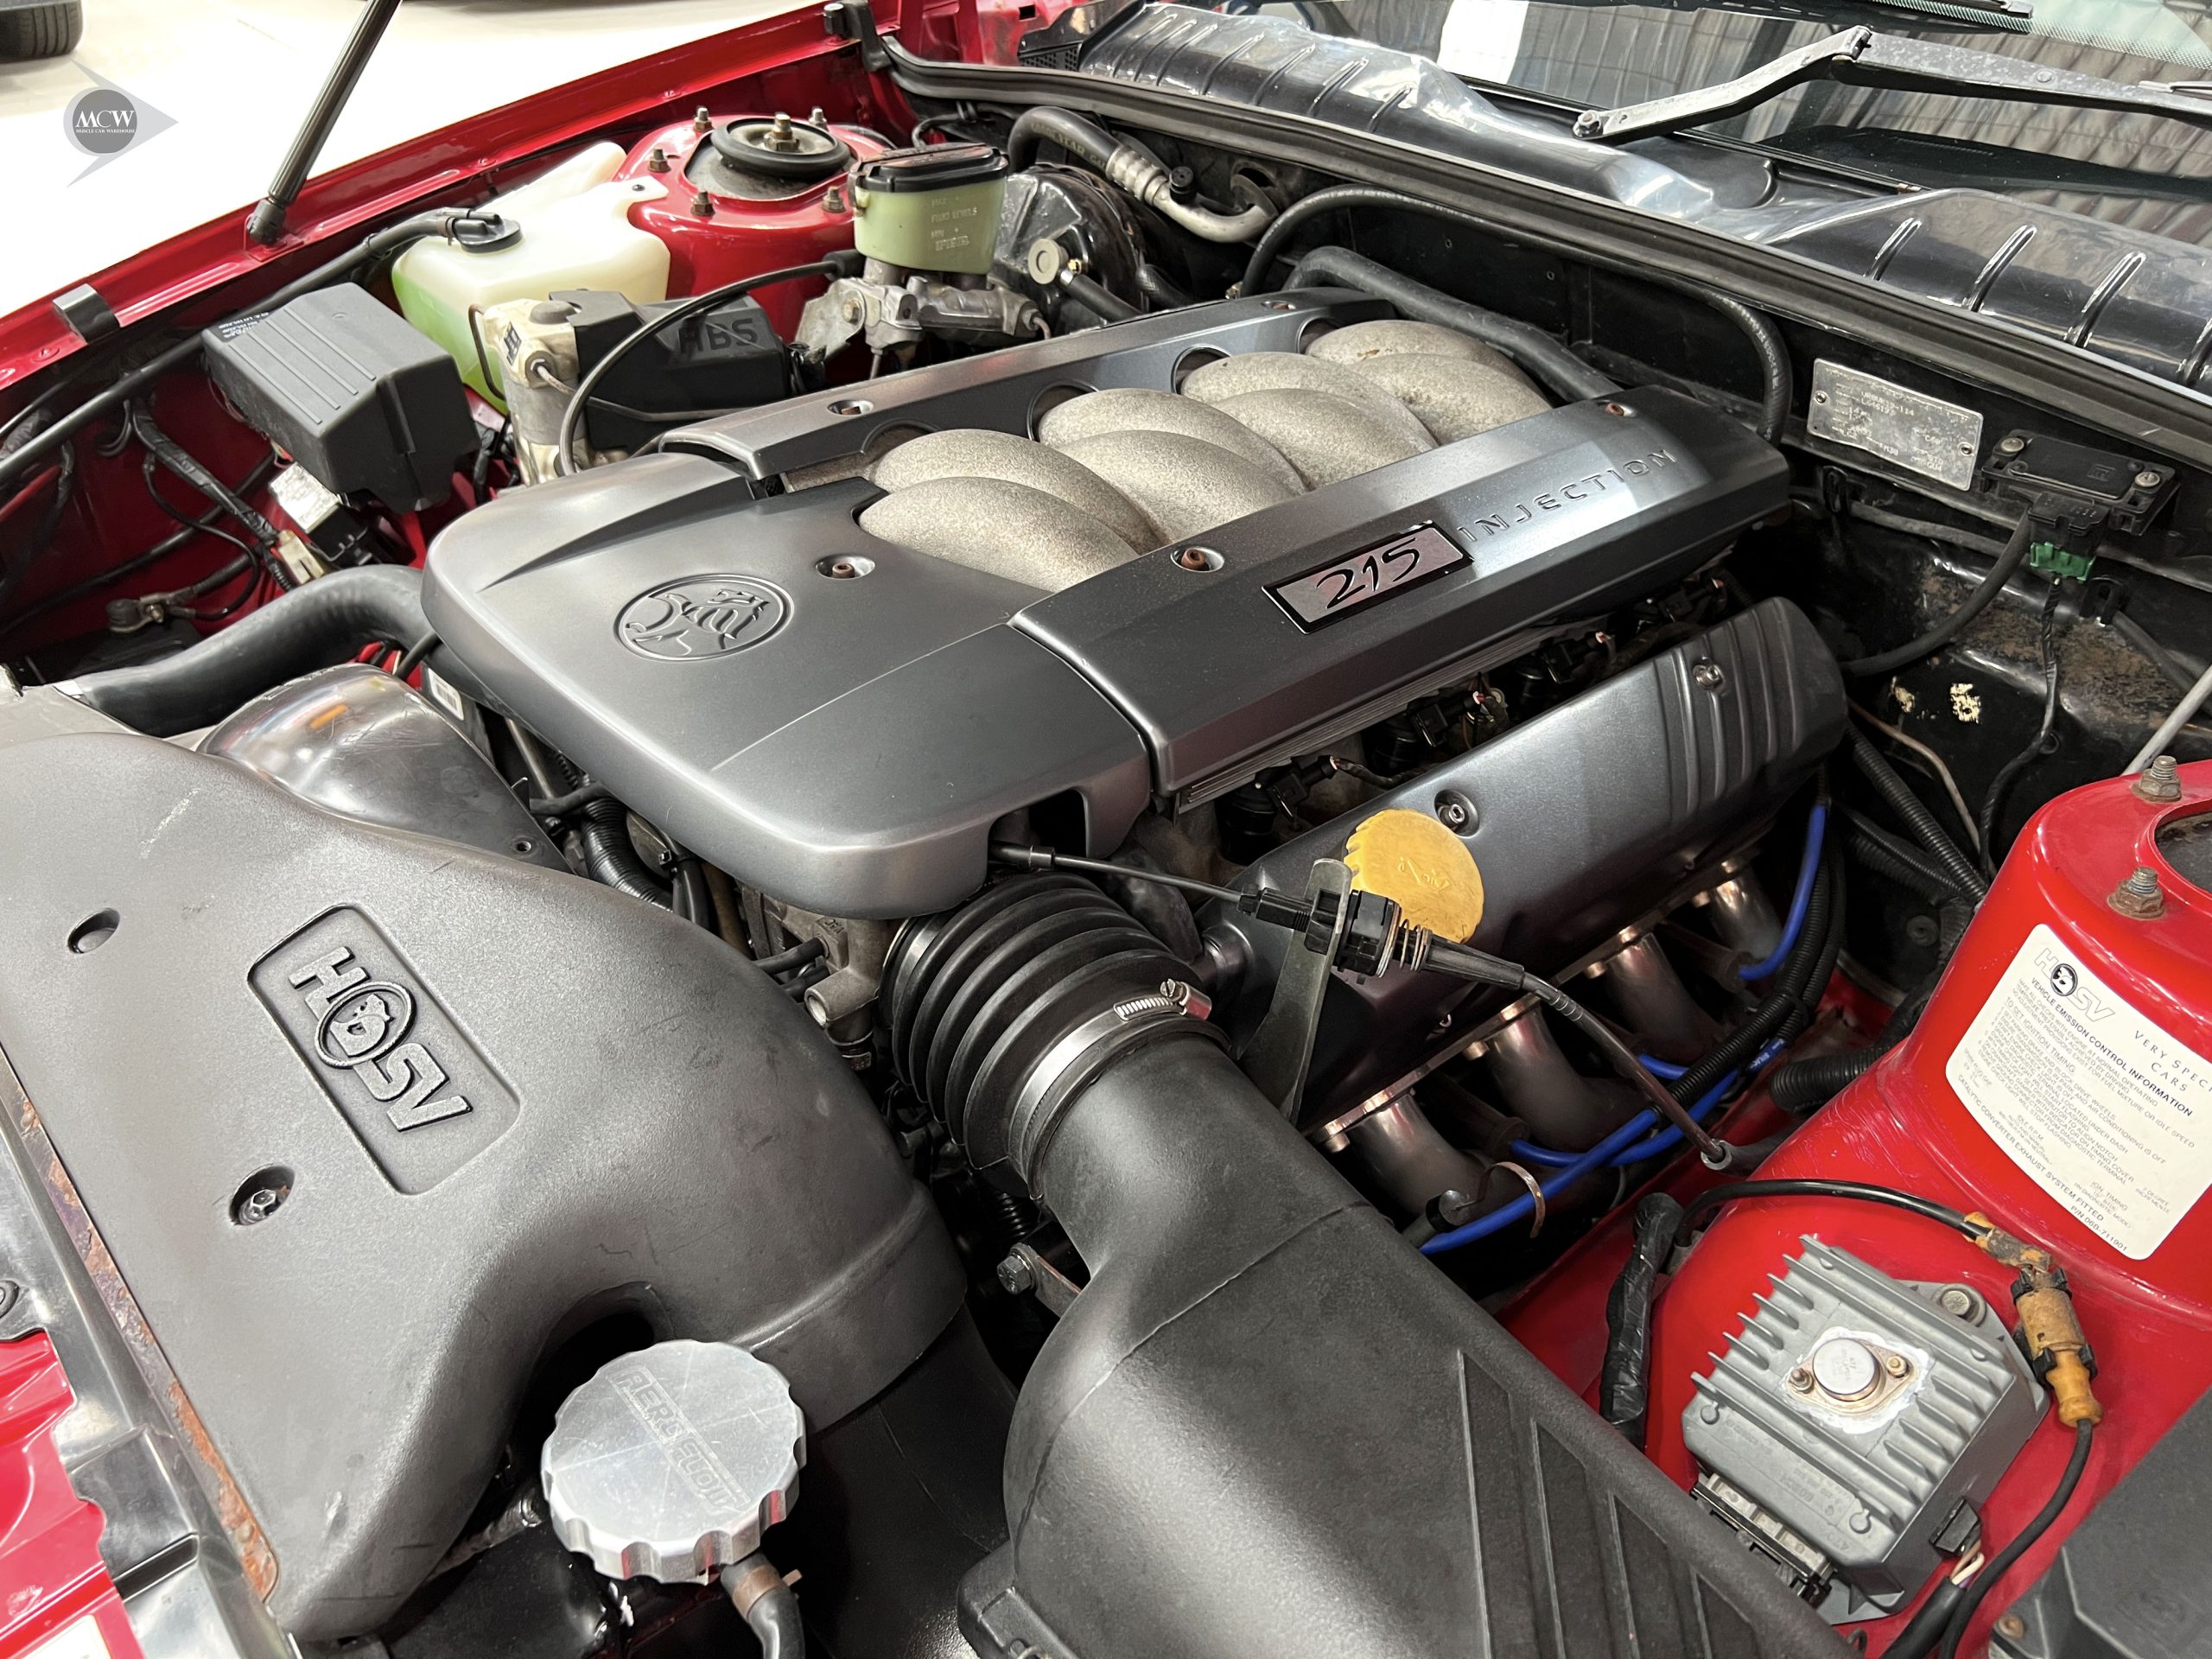 1993 Holden VR Commodore GTS Replica Engine - Muscle Car Warehouse